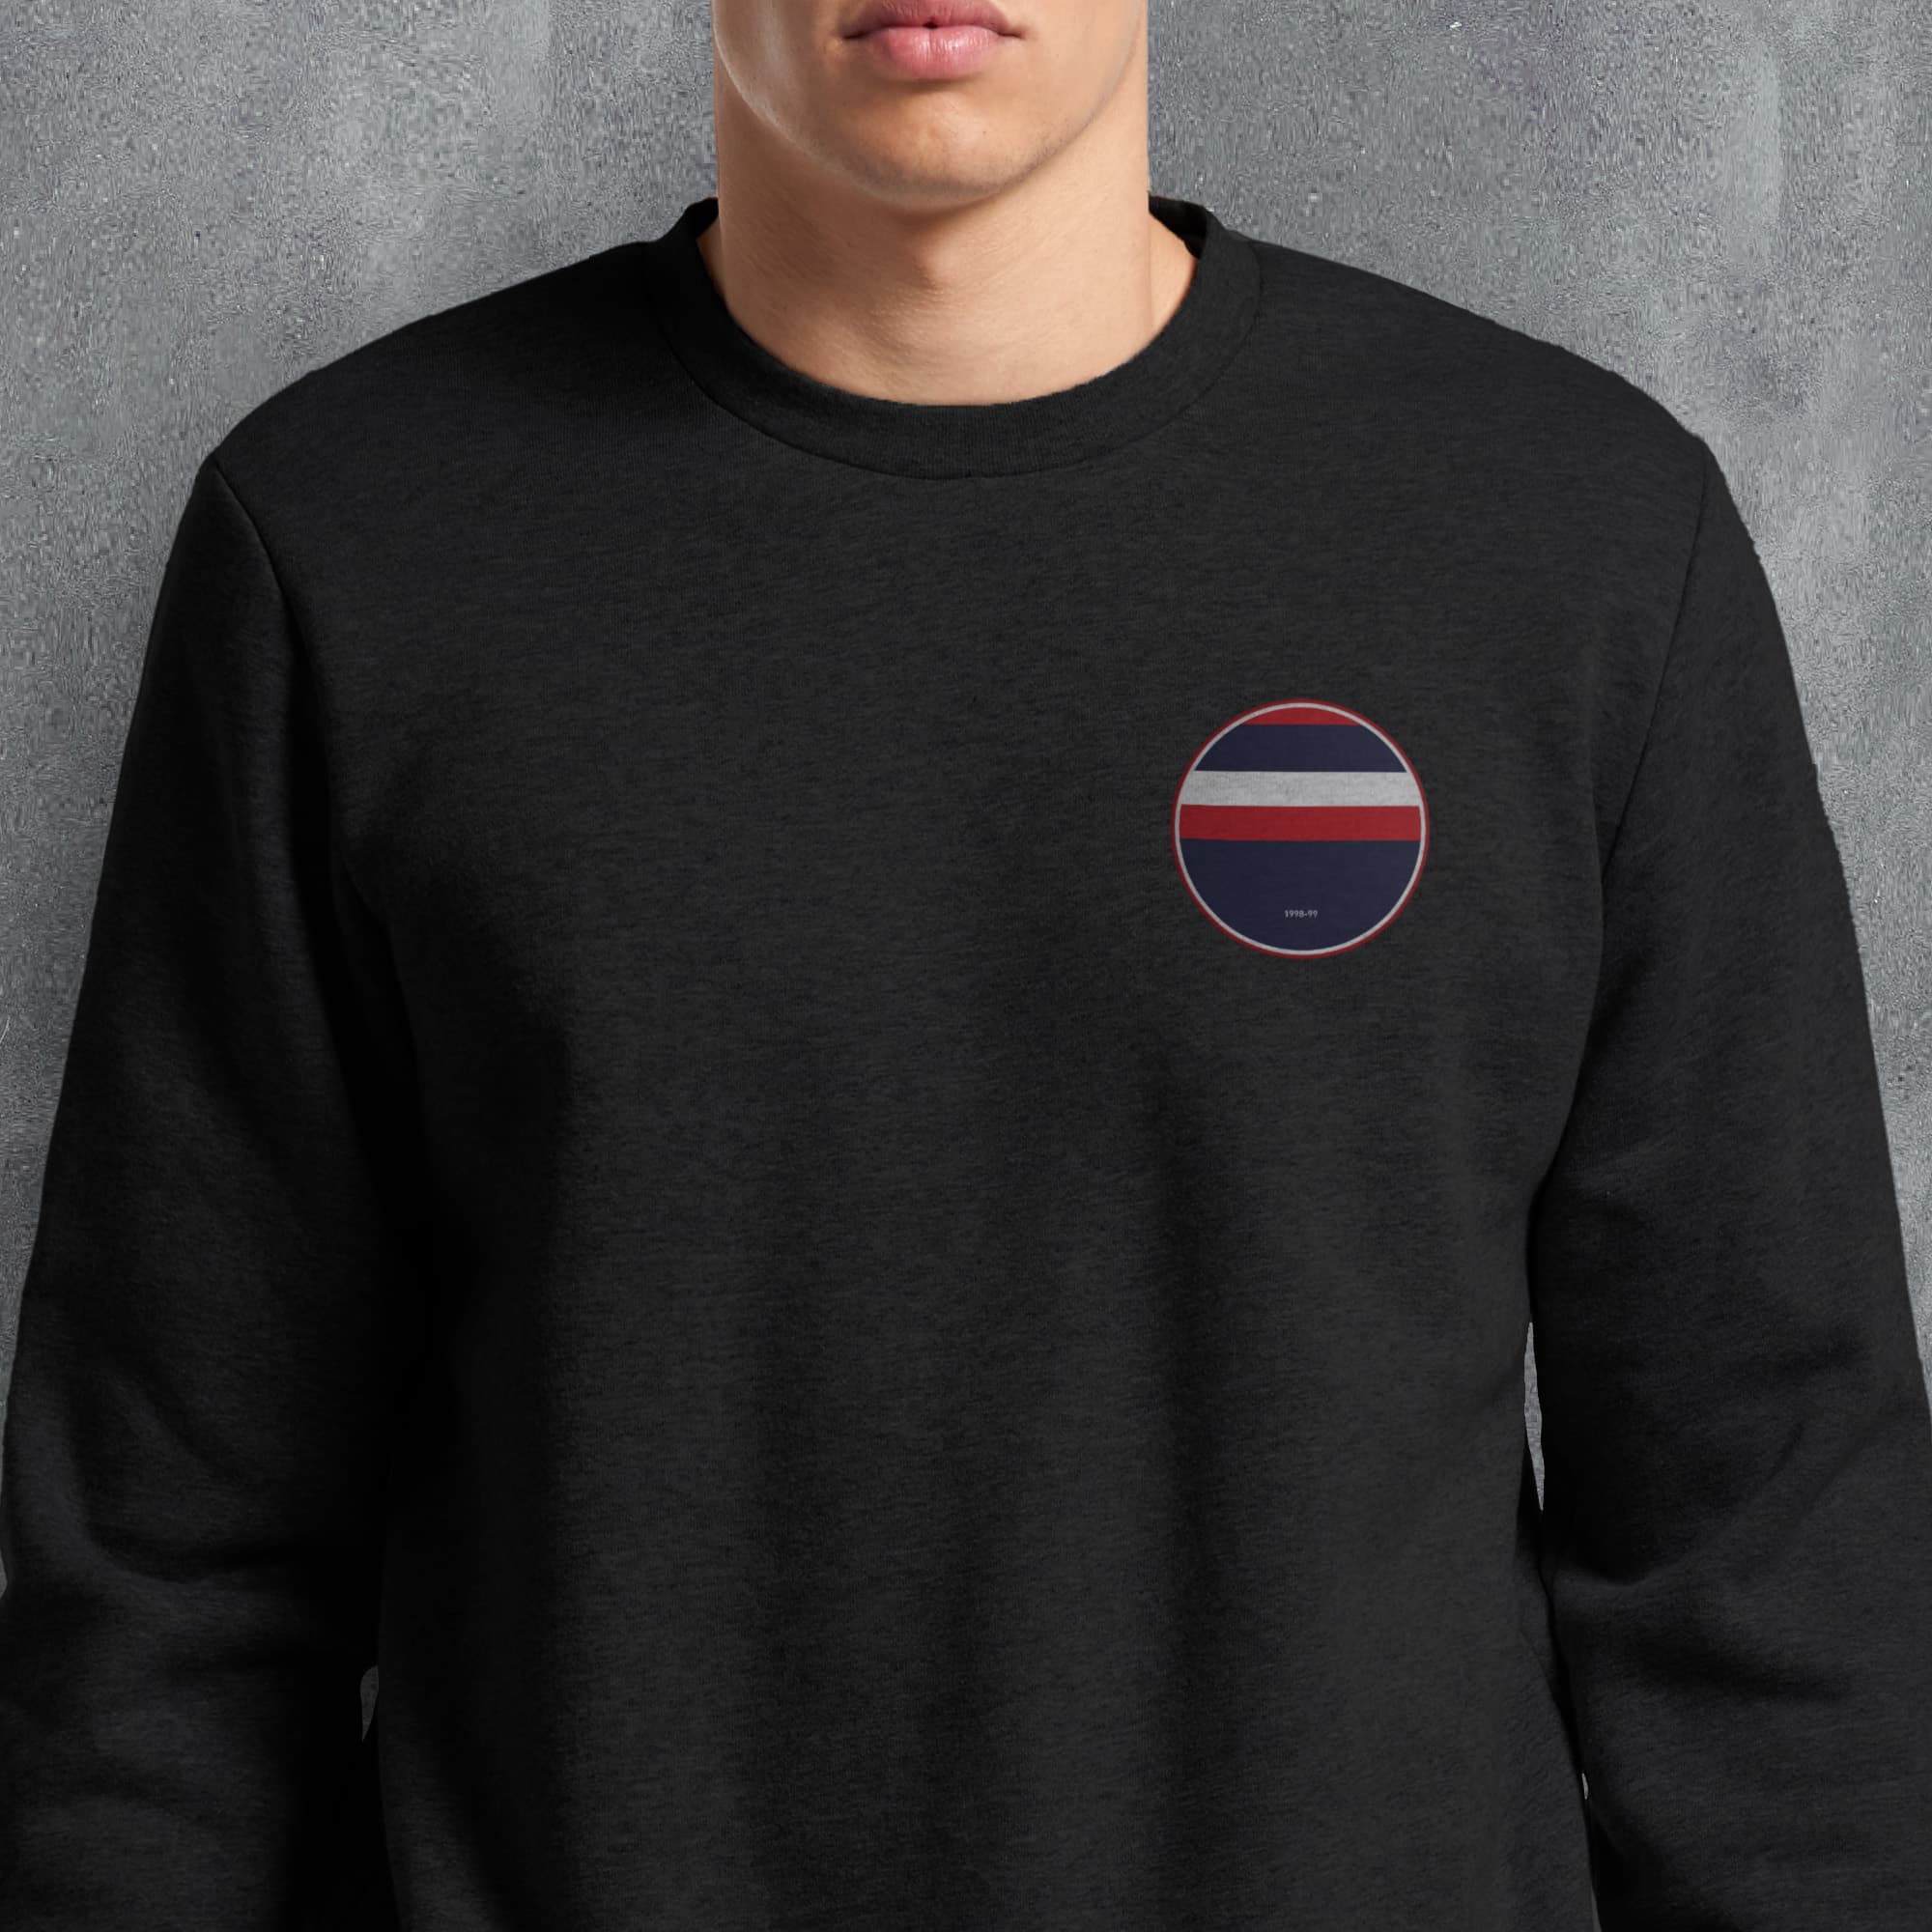 a man wearing a black sweatshirt with a red, white, and blue circle patch